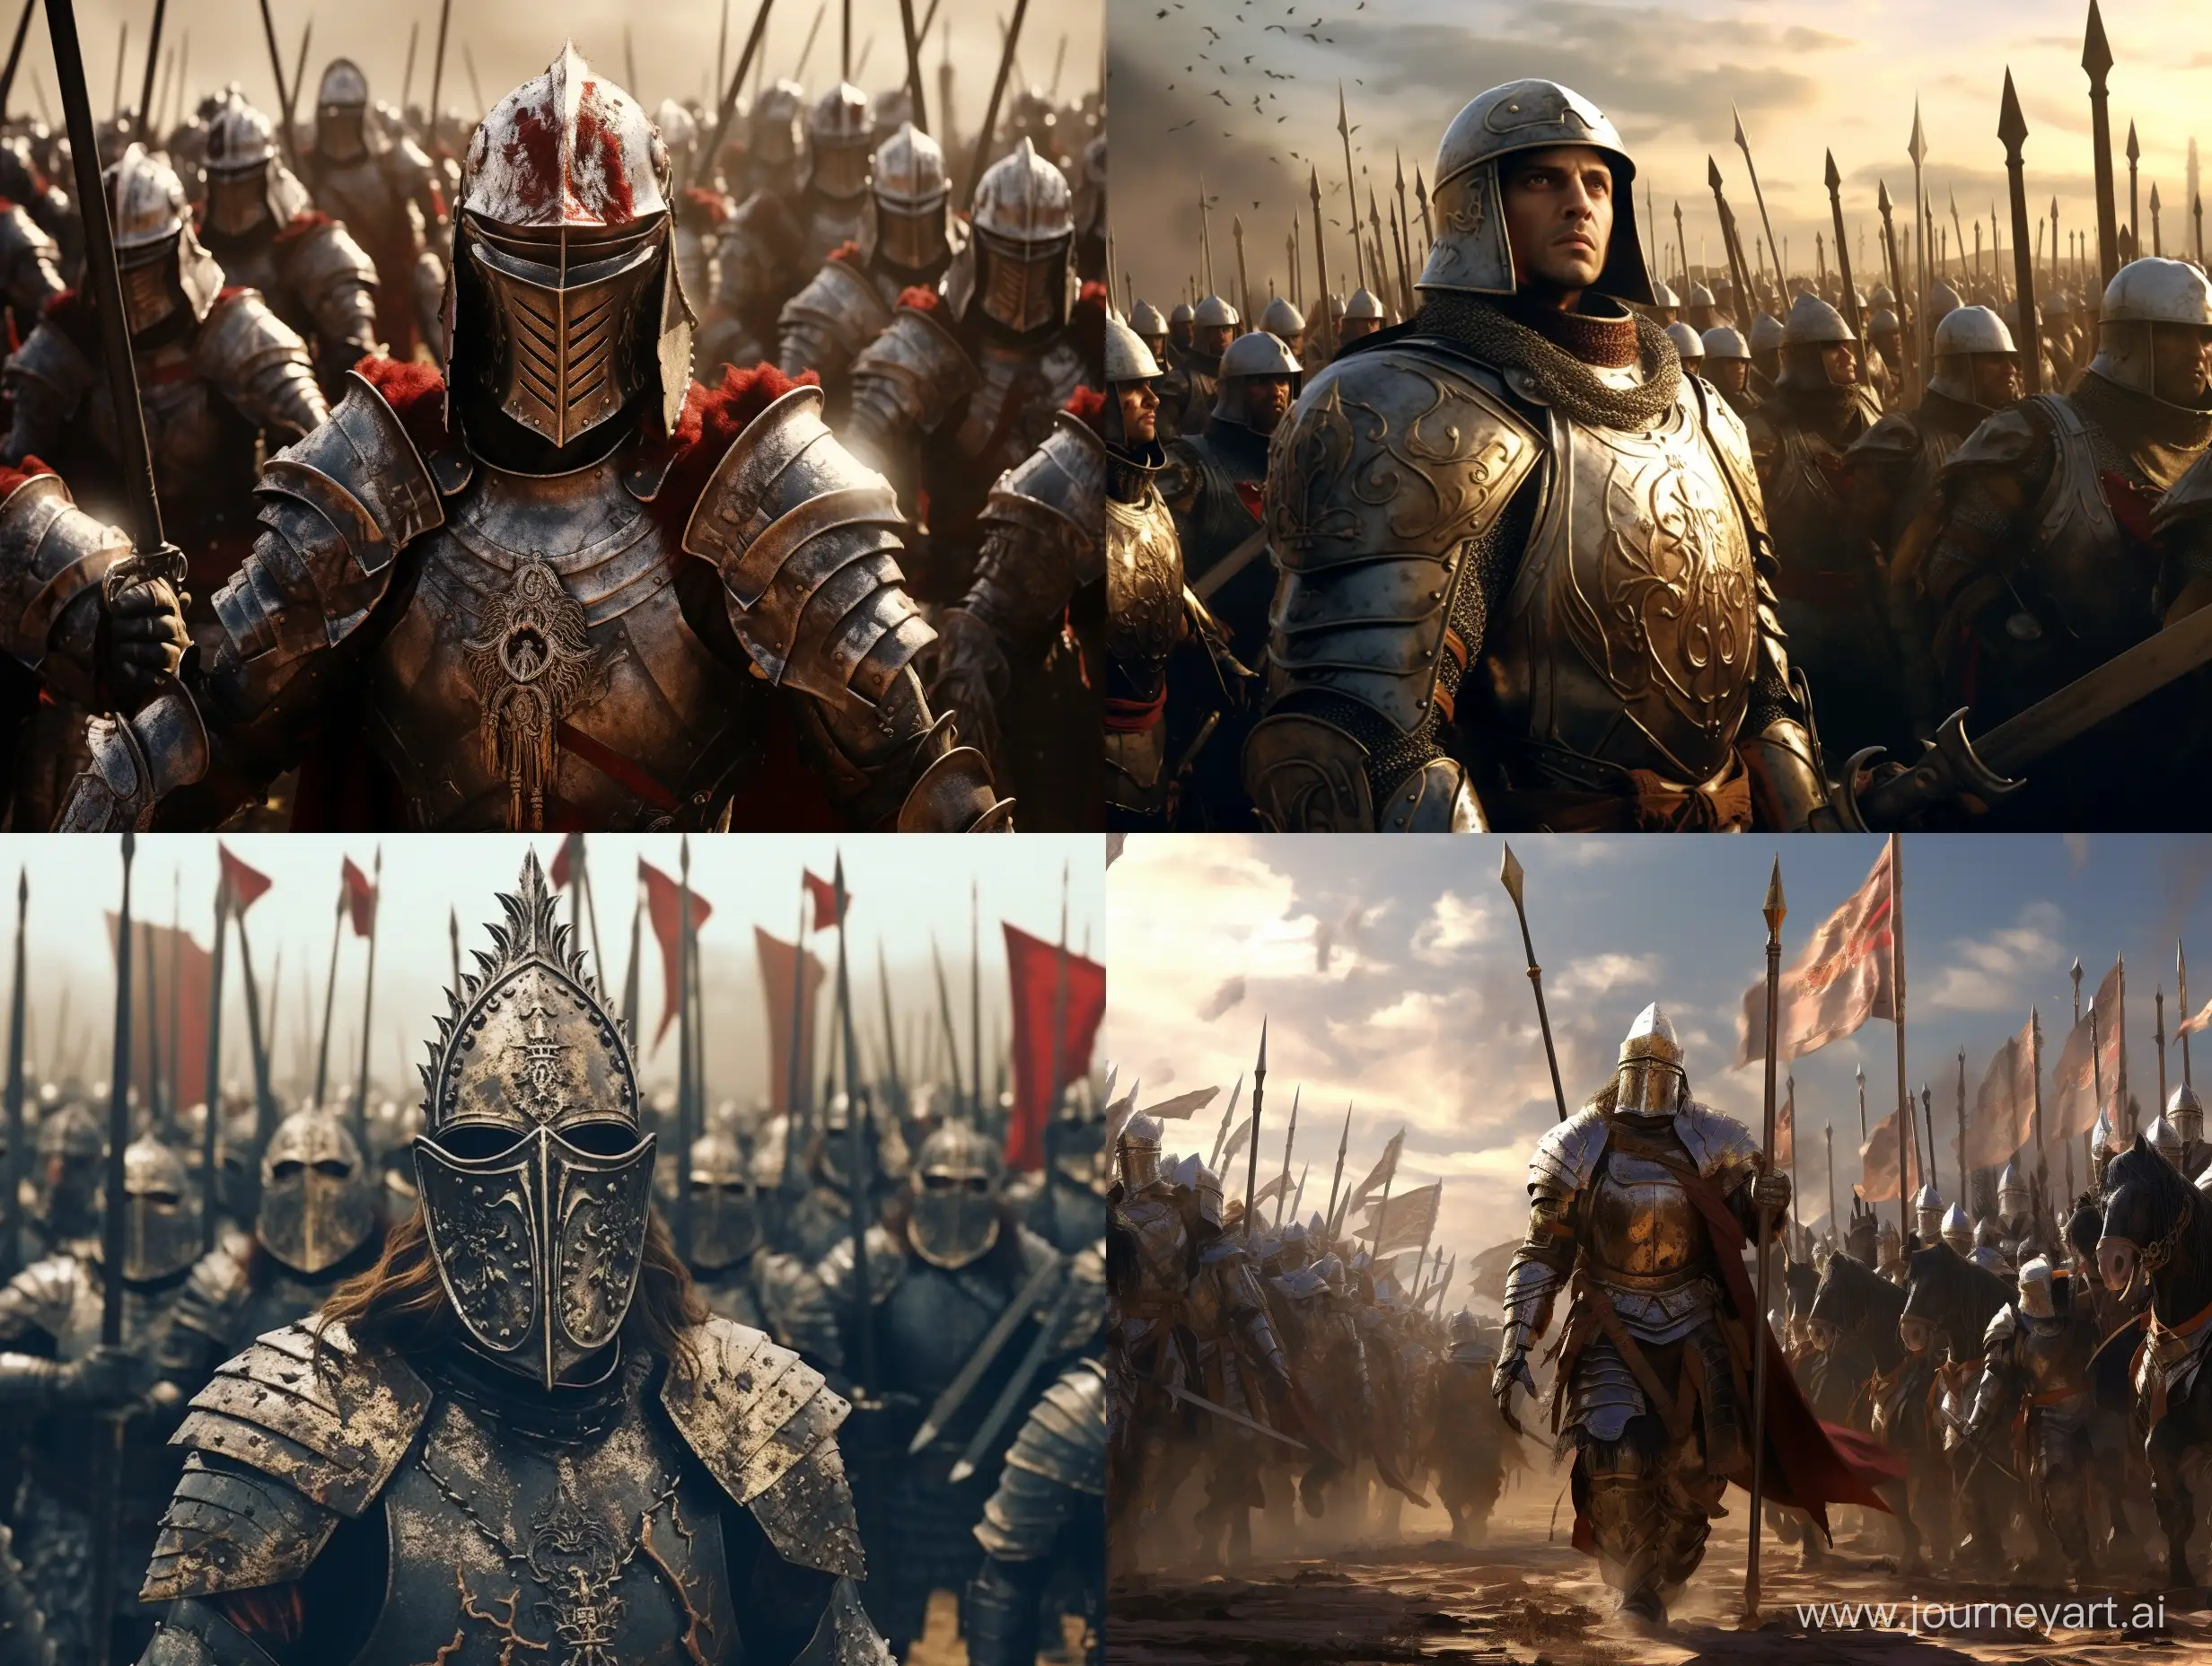 The medieval army
